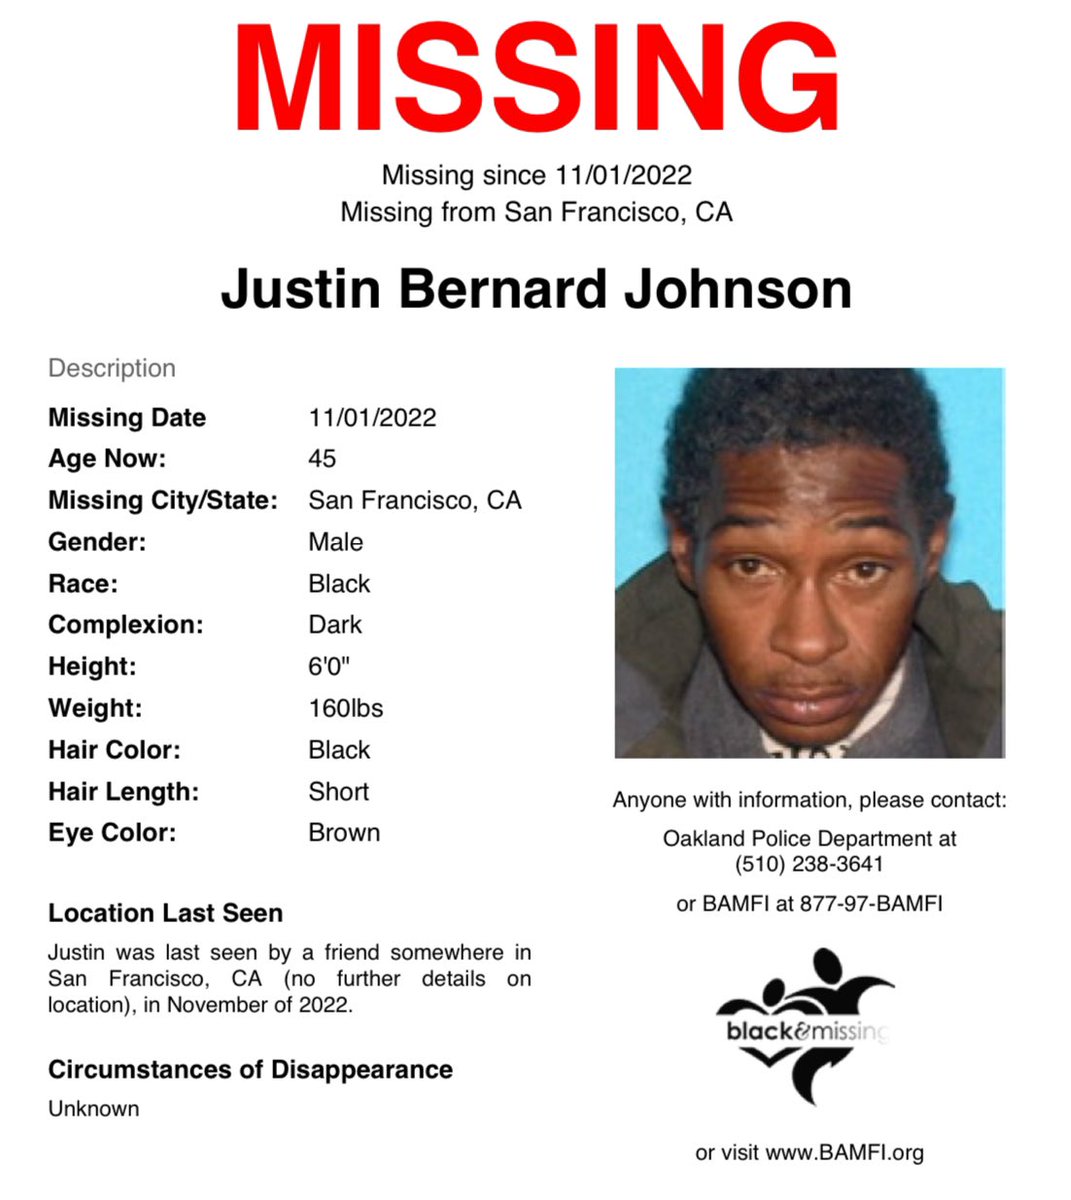 #SanFrancisco, #CA: 45y/o Justin Johnson has been MISSING for almost 2 years & hasn’t been seen since November 1st, 2022. He was last seen by a friend somewhere in San Francisco. Please share to #HelpUsFindJustinJohnson #JustinJohnson